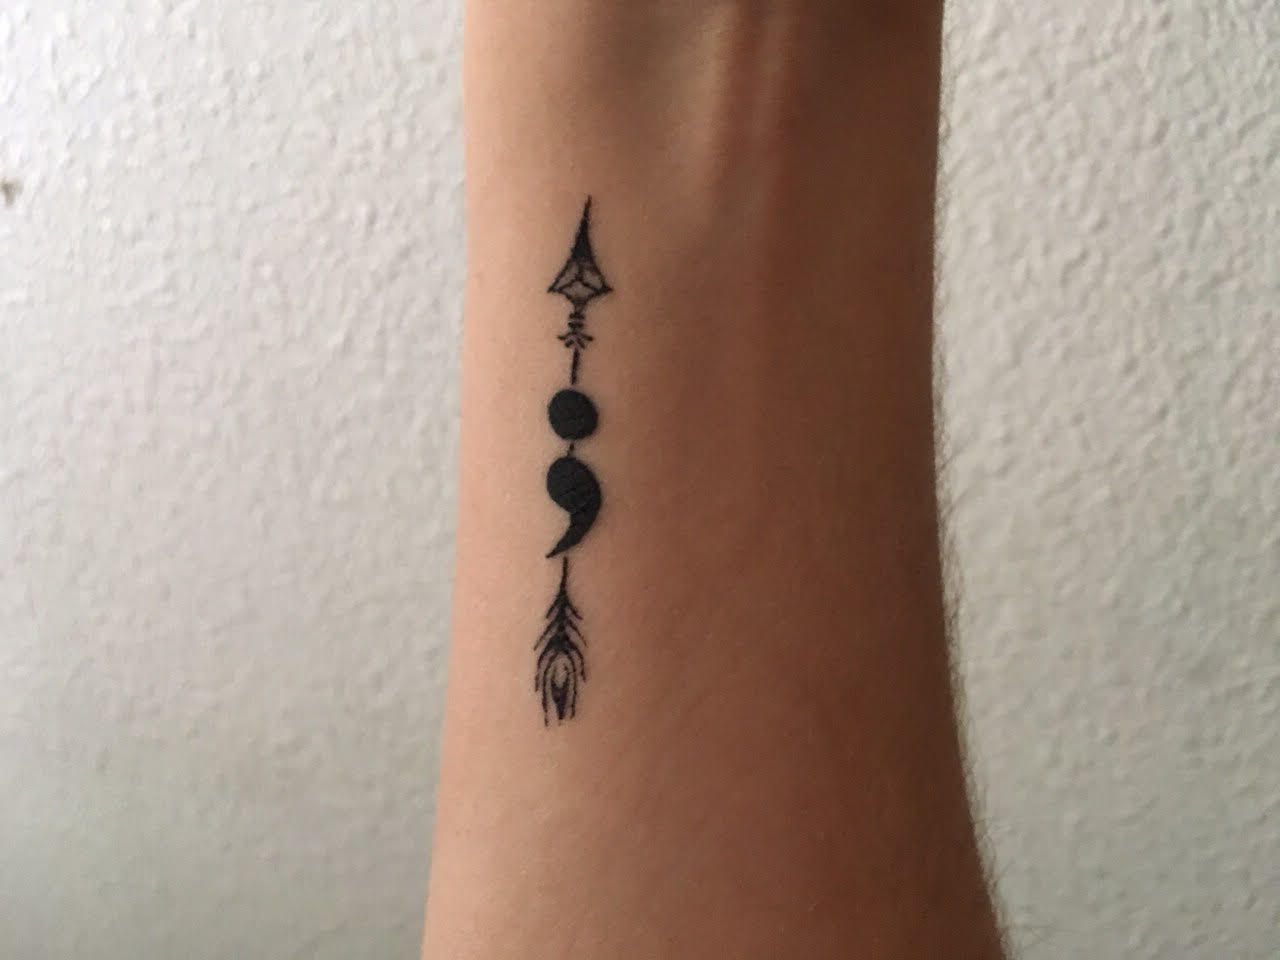 33 Meaningful Mental Health Tattoos to Give You Strength  Courage